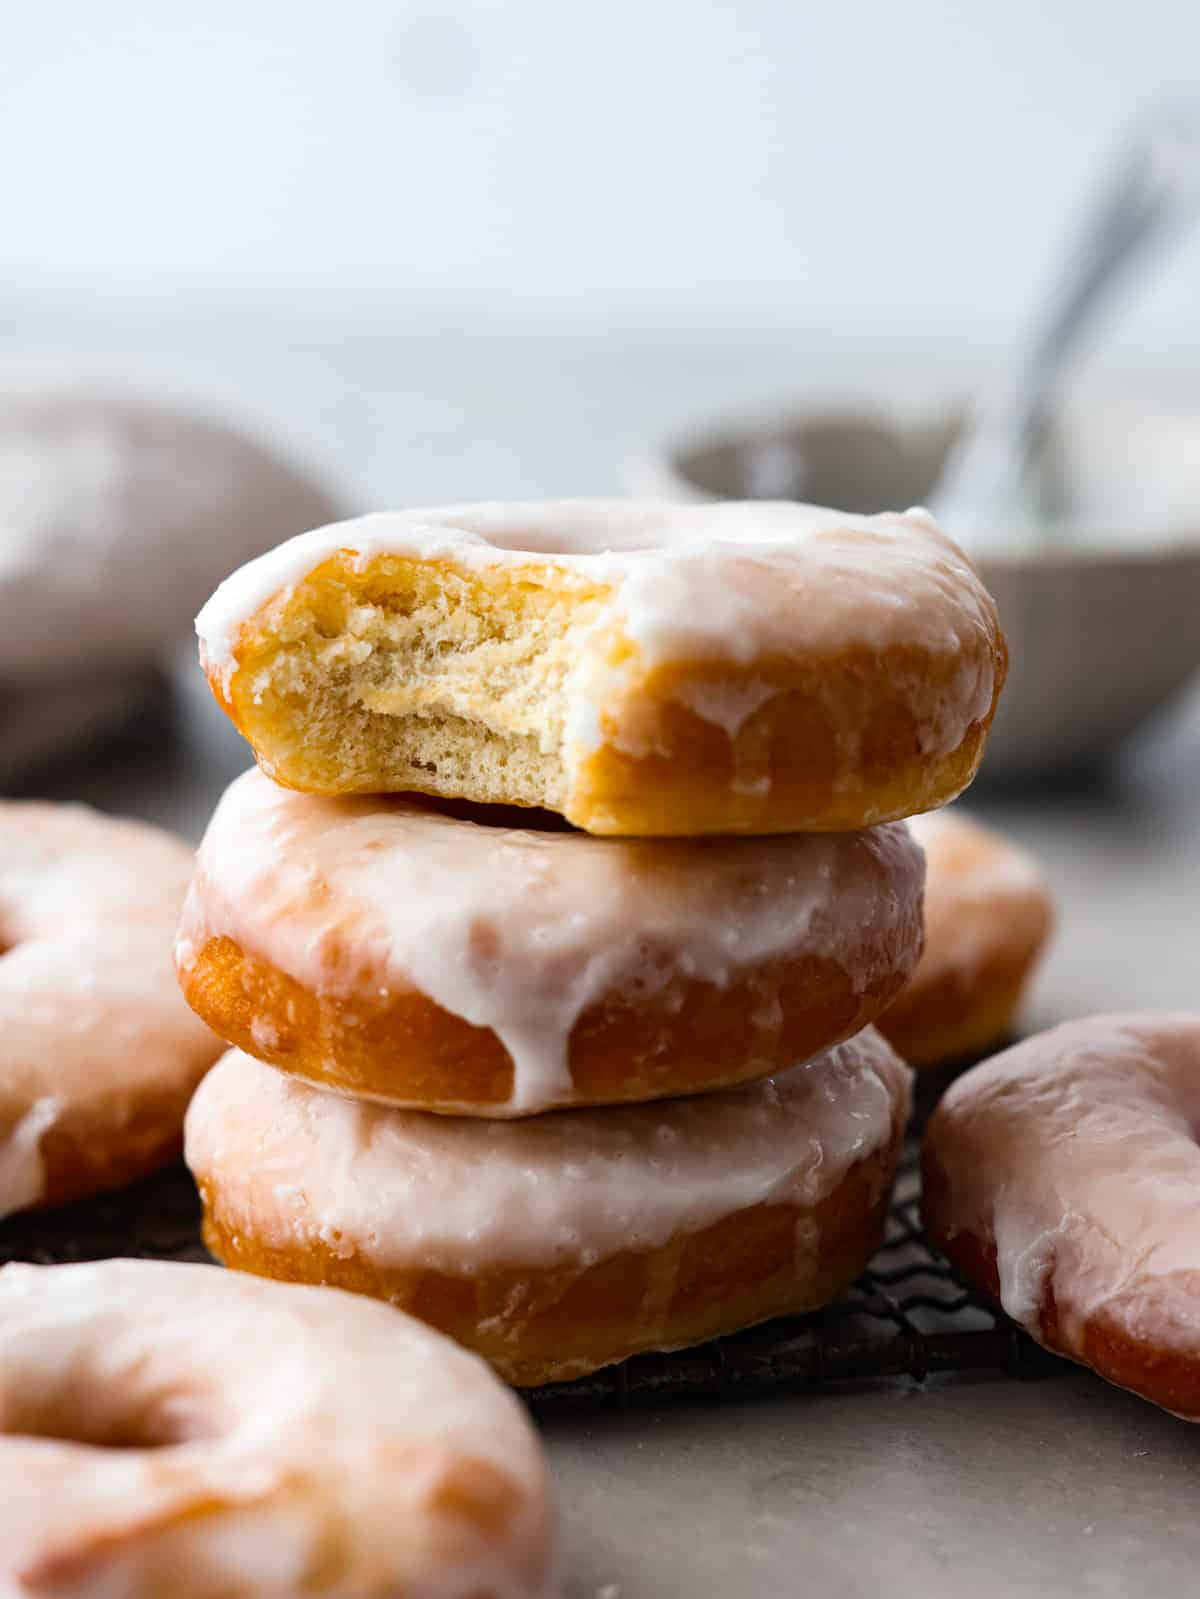 Satisfy your cravings with a freshly glazed donut. Wallpaper